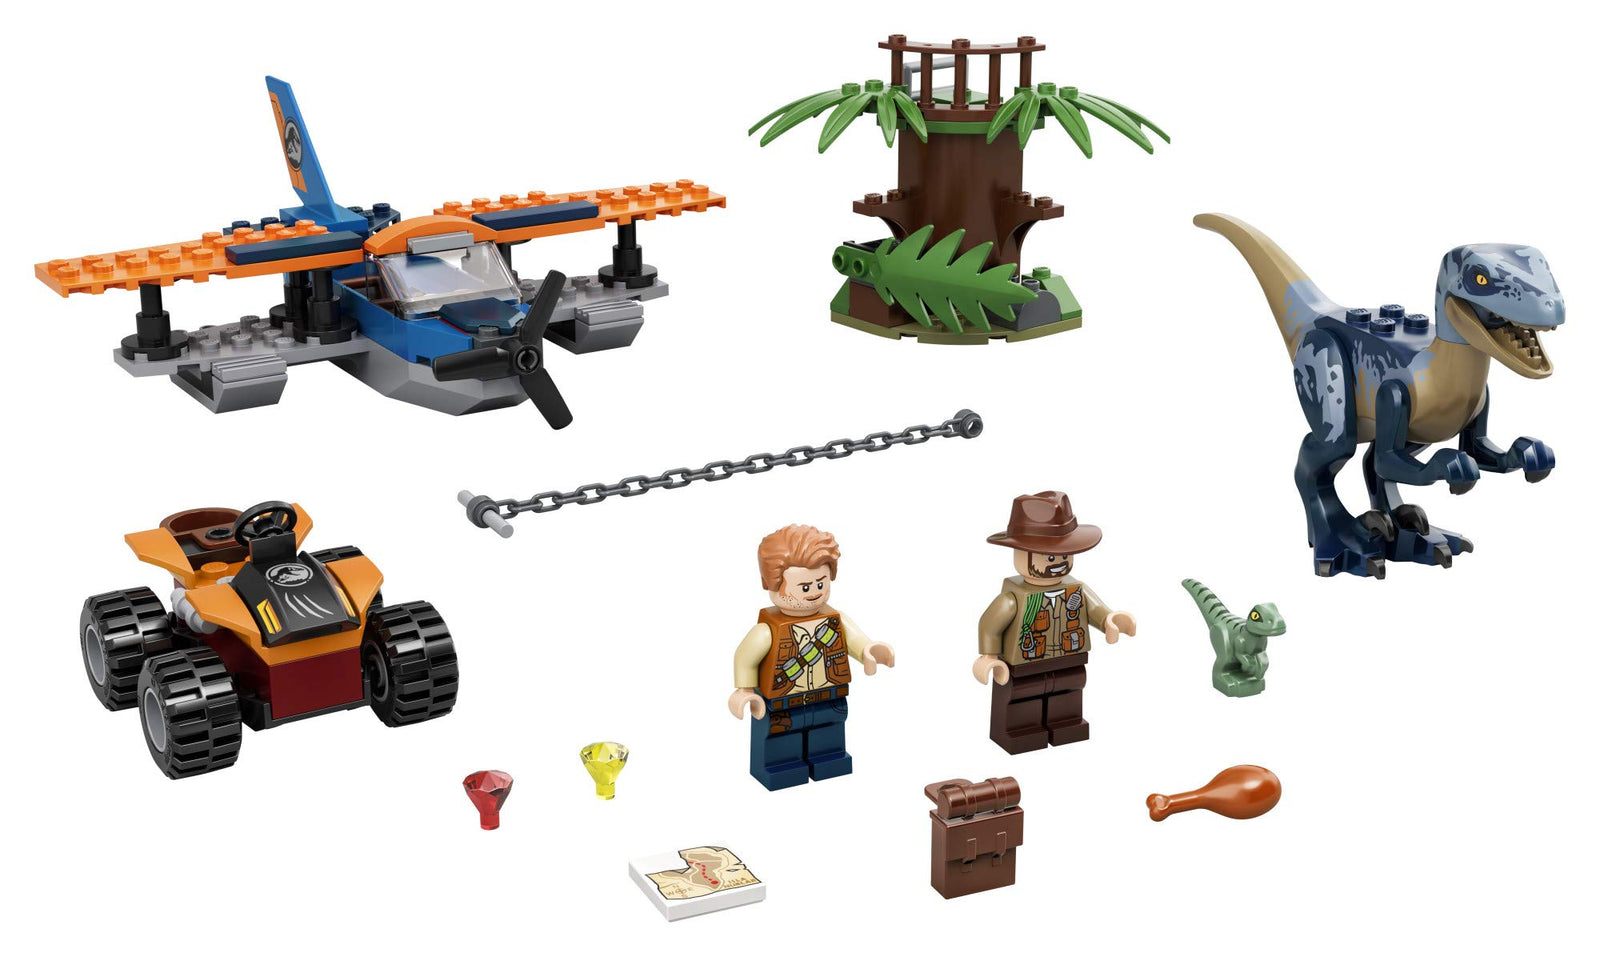 LEGO Jurassic World Velociraptor: Biplane Rescue Mission 75942, Dinosaur Toy for Preschool Kids, Featuring a Buildable Plane Toy, Posable Velociraptor, and Baby Raptor Delta (101 Pieces)